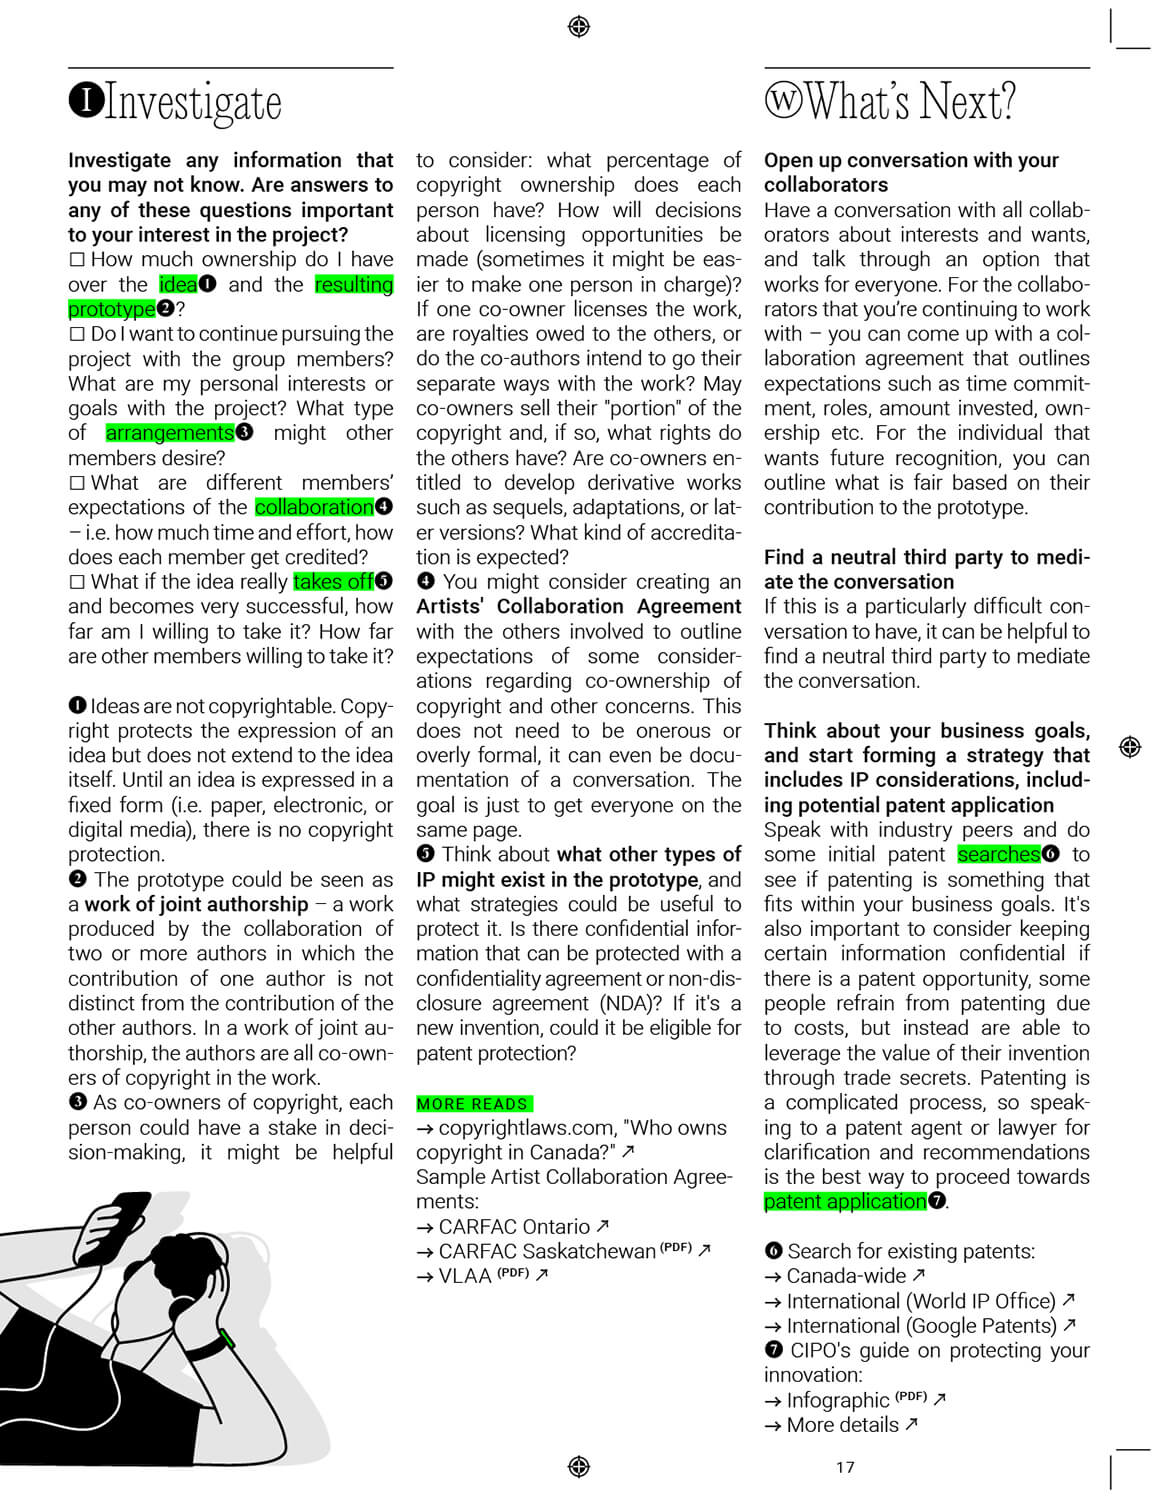 How to make a website: Page 11